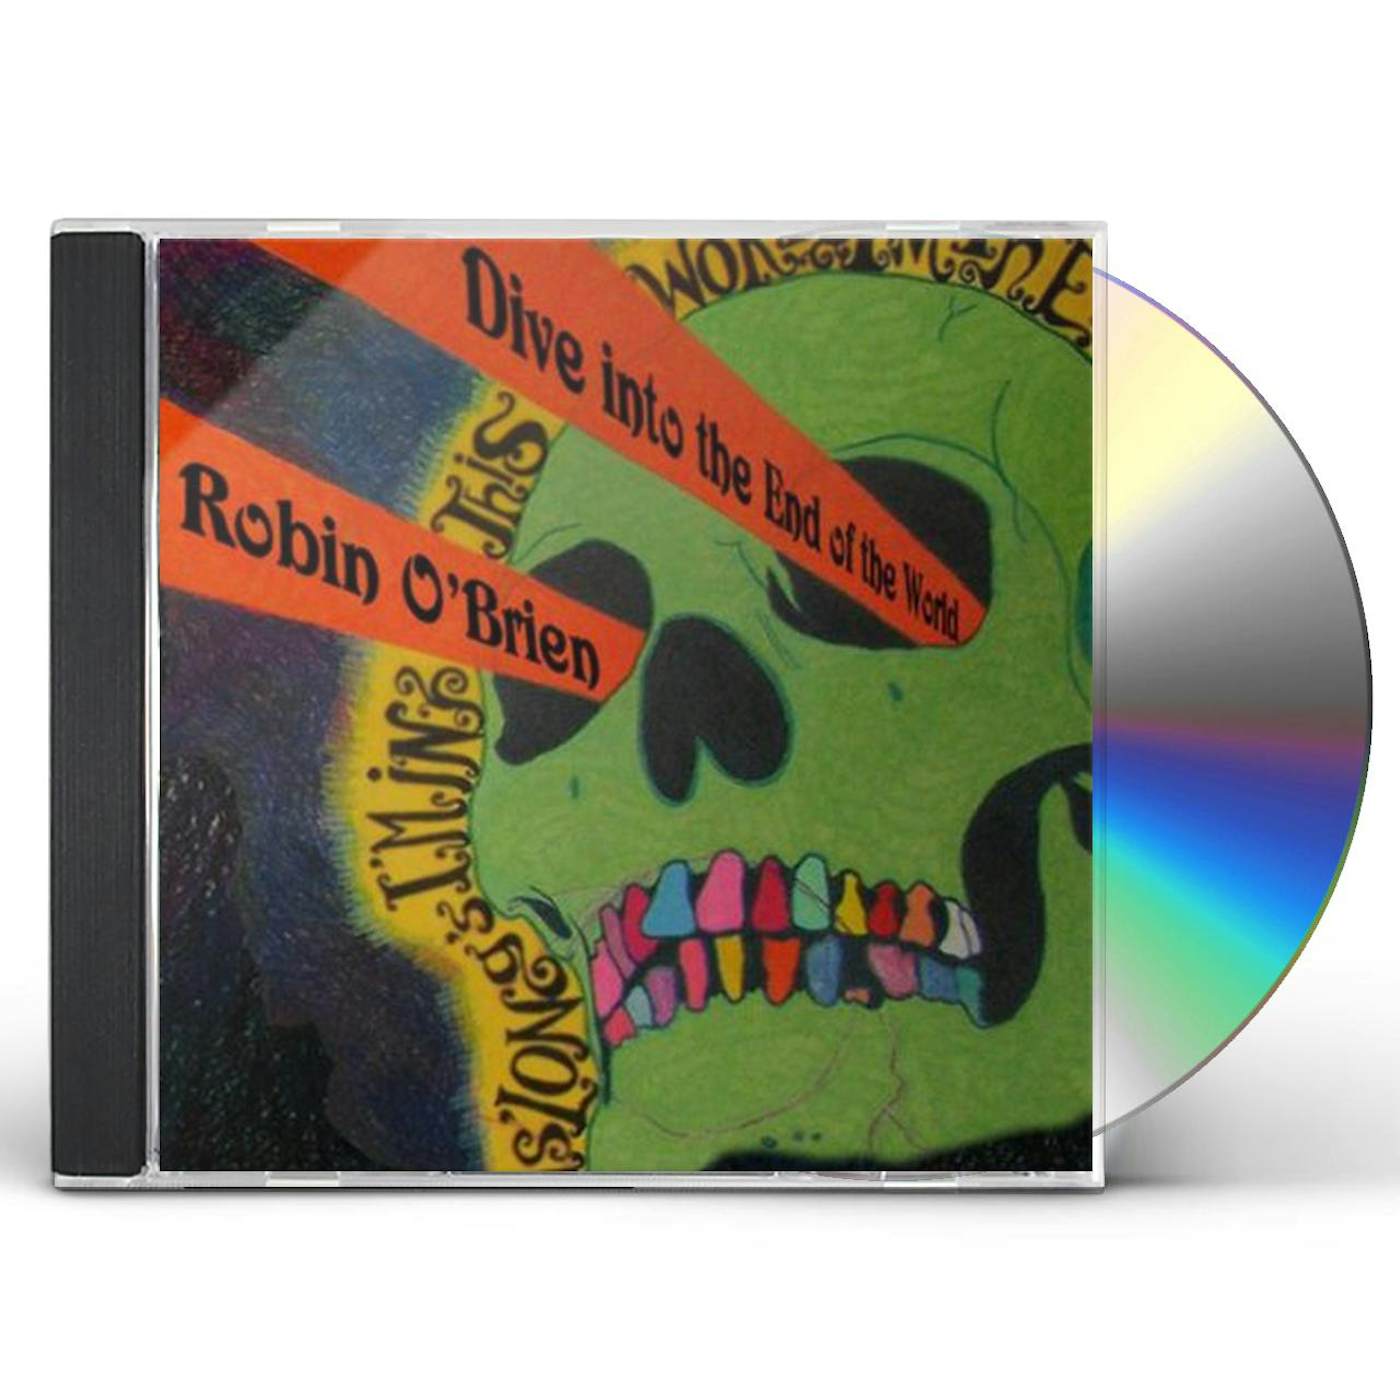 Robin O'Brien DIVE INTO THE END OF THE WORLD CD